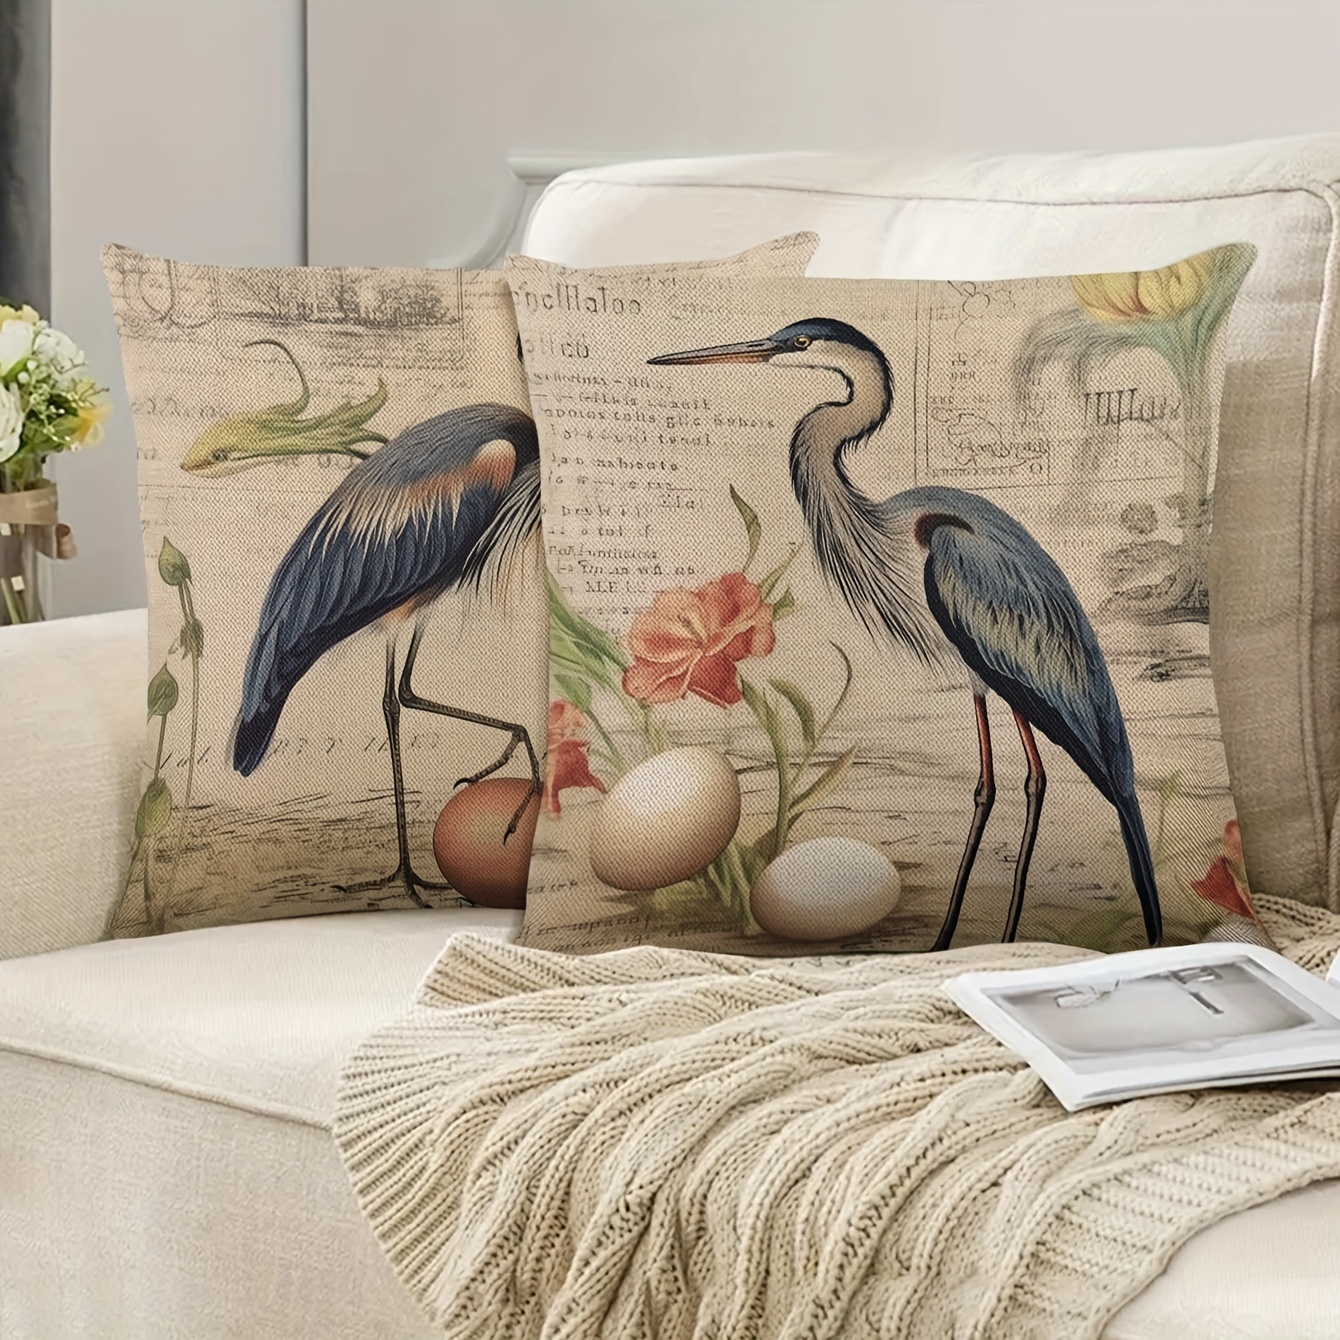 

2-pack Rustic Heron Print Linen Pillow Covers 17.72x17.72 Inches, Modern Country Style Square Cushion Cases, One-sided Print, Soft & Comfortable Home Decor For Daily Use (insert Not Included)